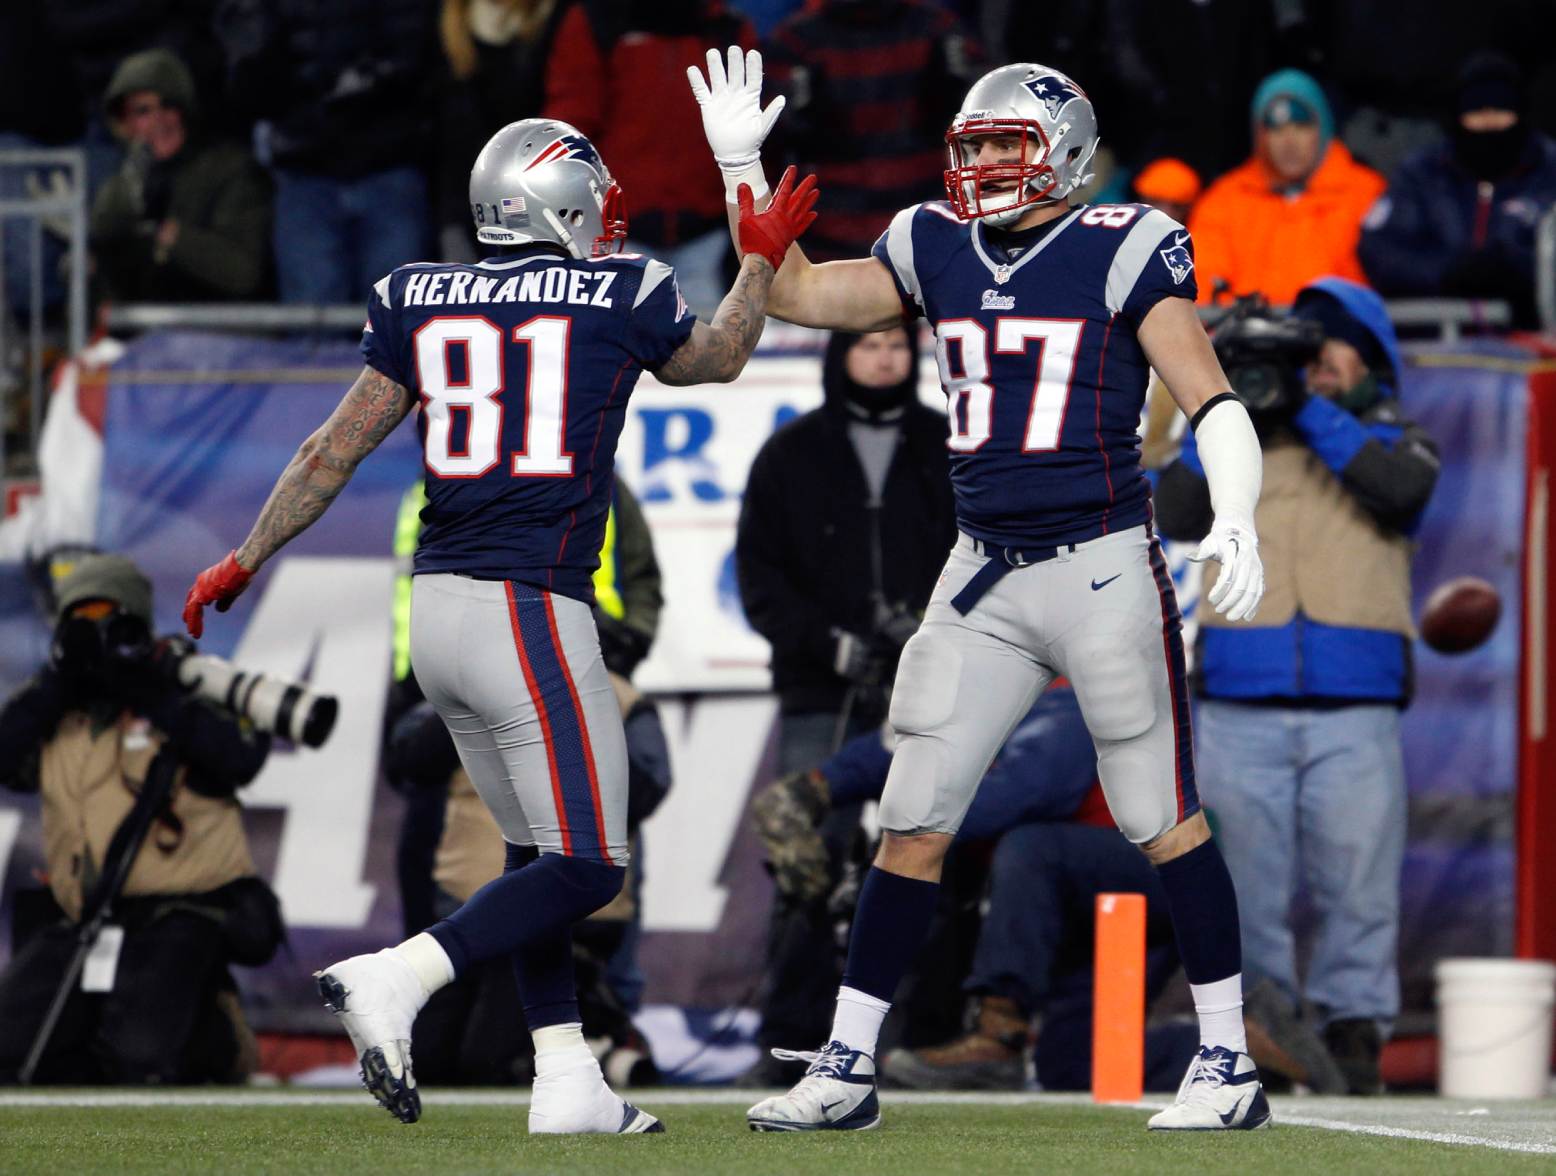 Dec 30, 2012; Foxborough, MA, USA; New England Patriots tight end Rob Gronkowski (87) is congratulated by tight end Aaron Hernandez (81) after his touchdown against the Miami Dolphins during the second half at Gillette Stadium. The New England Patriots defeated the Miami Dolphins 28-0. Credit: David Butler II-USA TODAY Sports